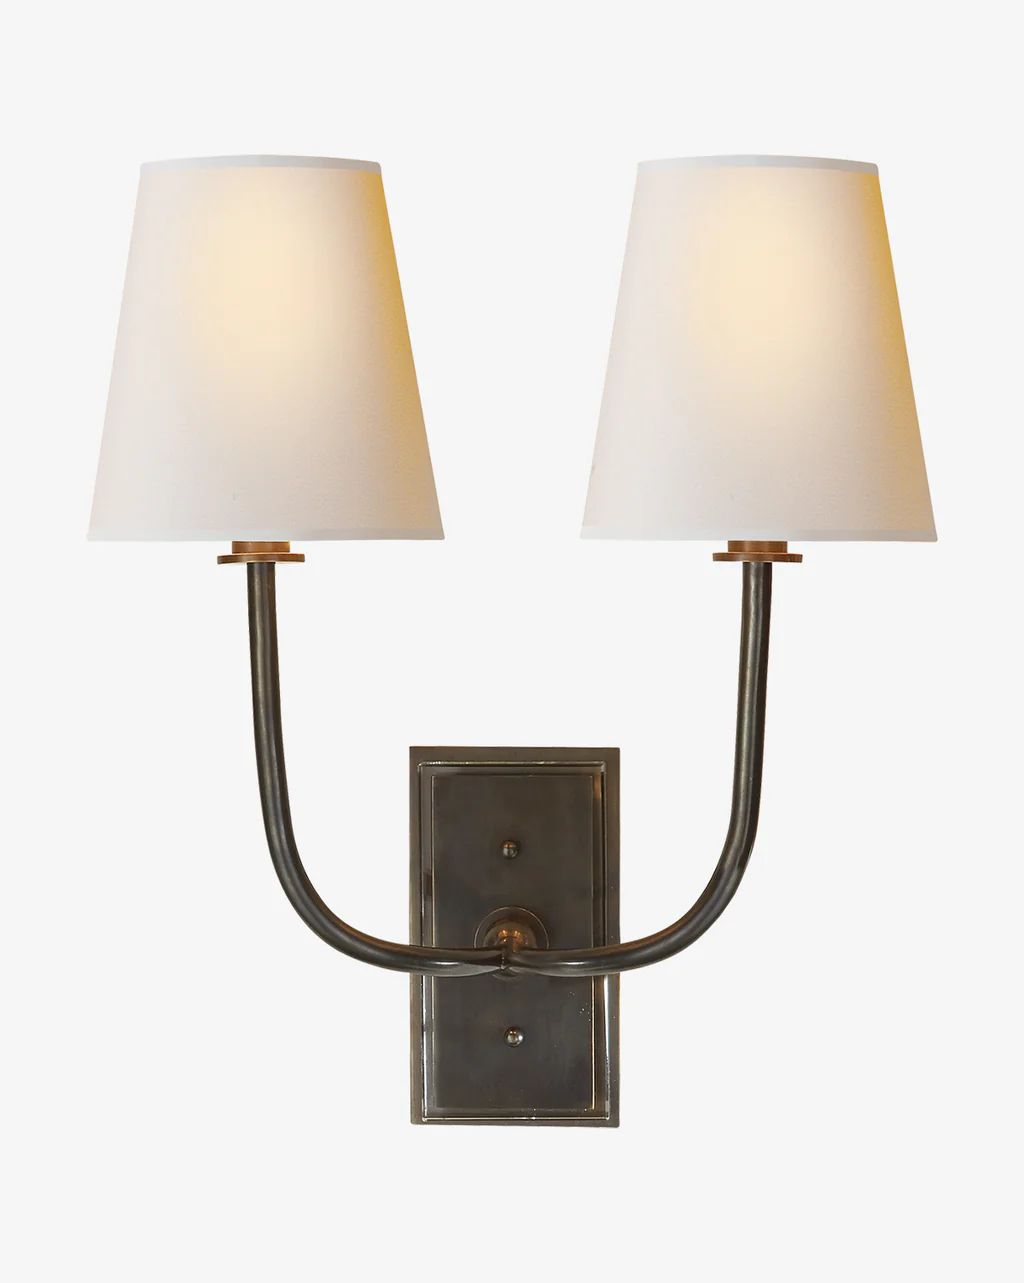 Hulton Double Sconce | McGee & Co.